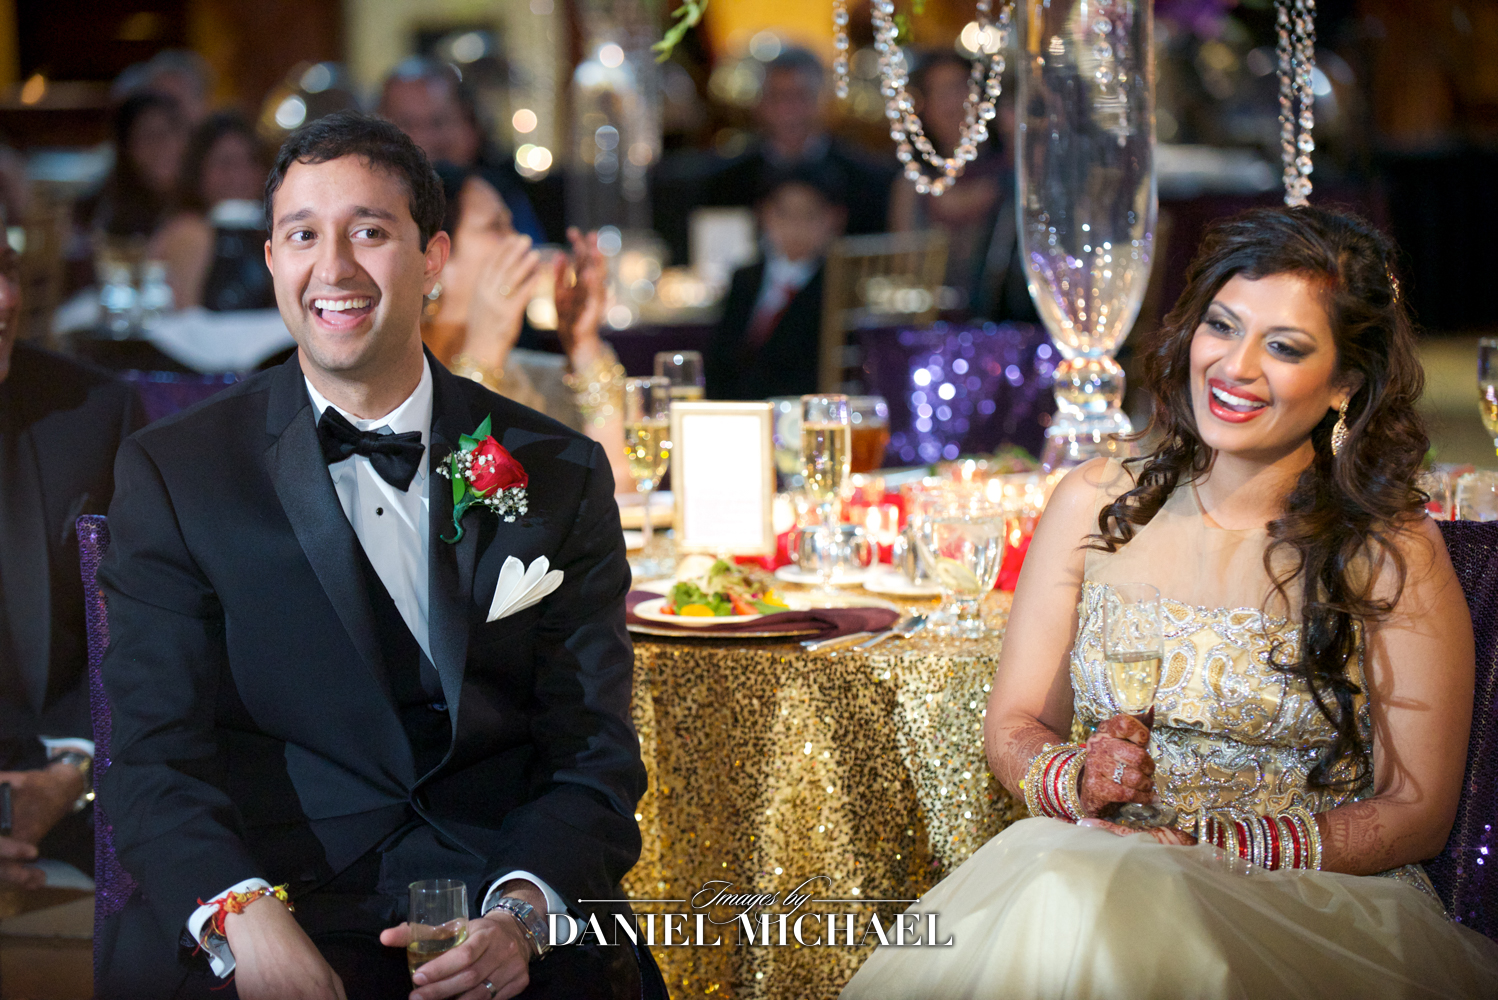 South Asian wedding reception scene with a photographer capturing spontaneous moments